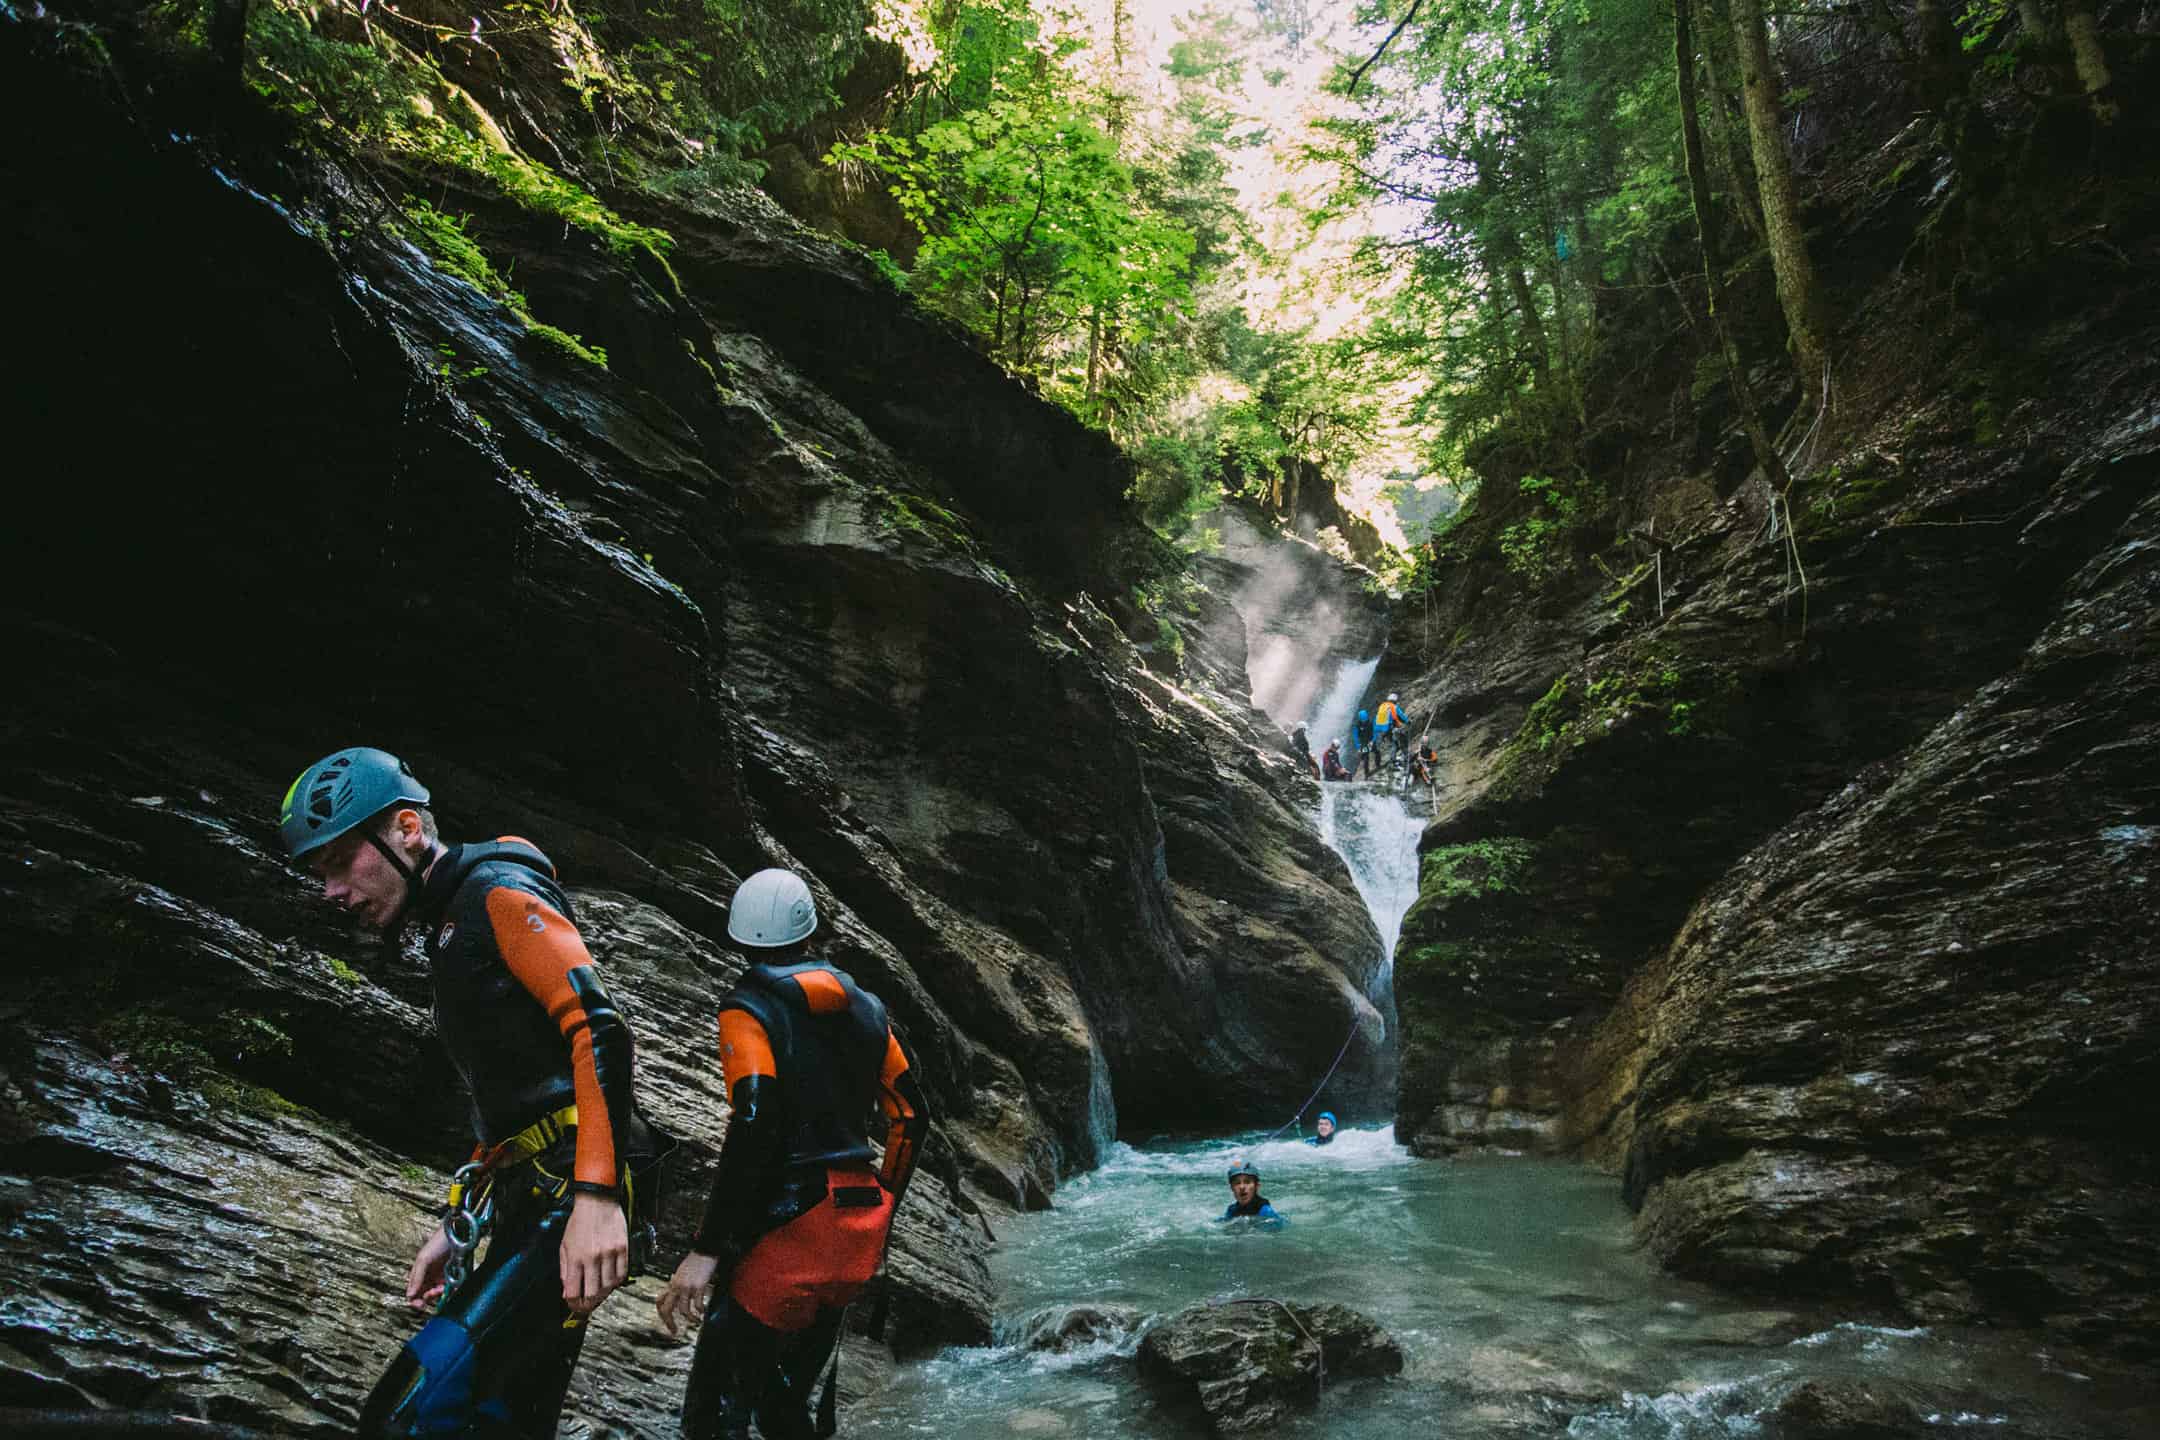 A group of people are canyoning down a river gorge